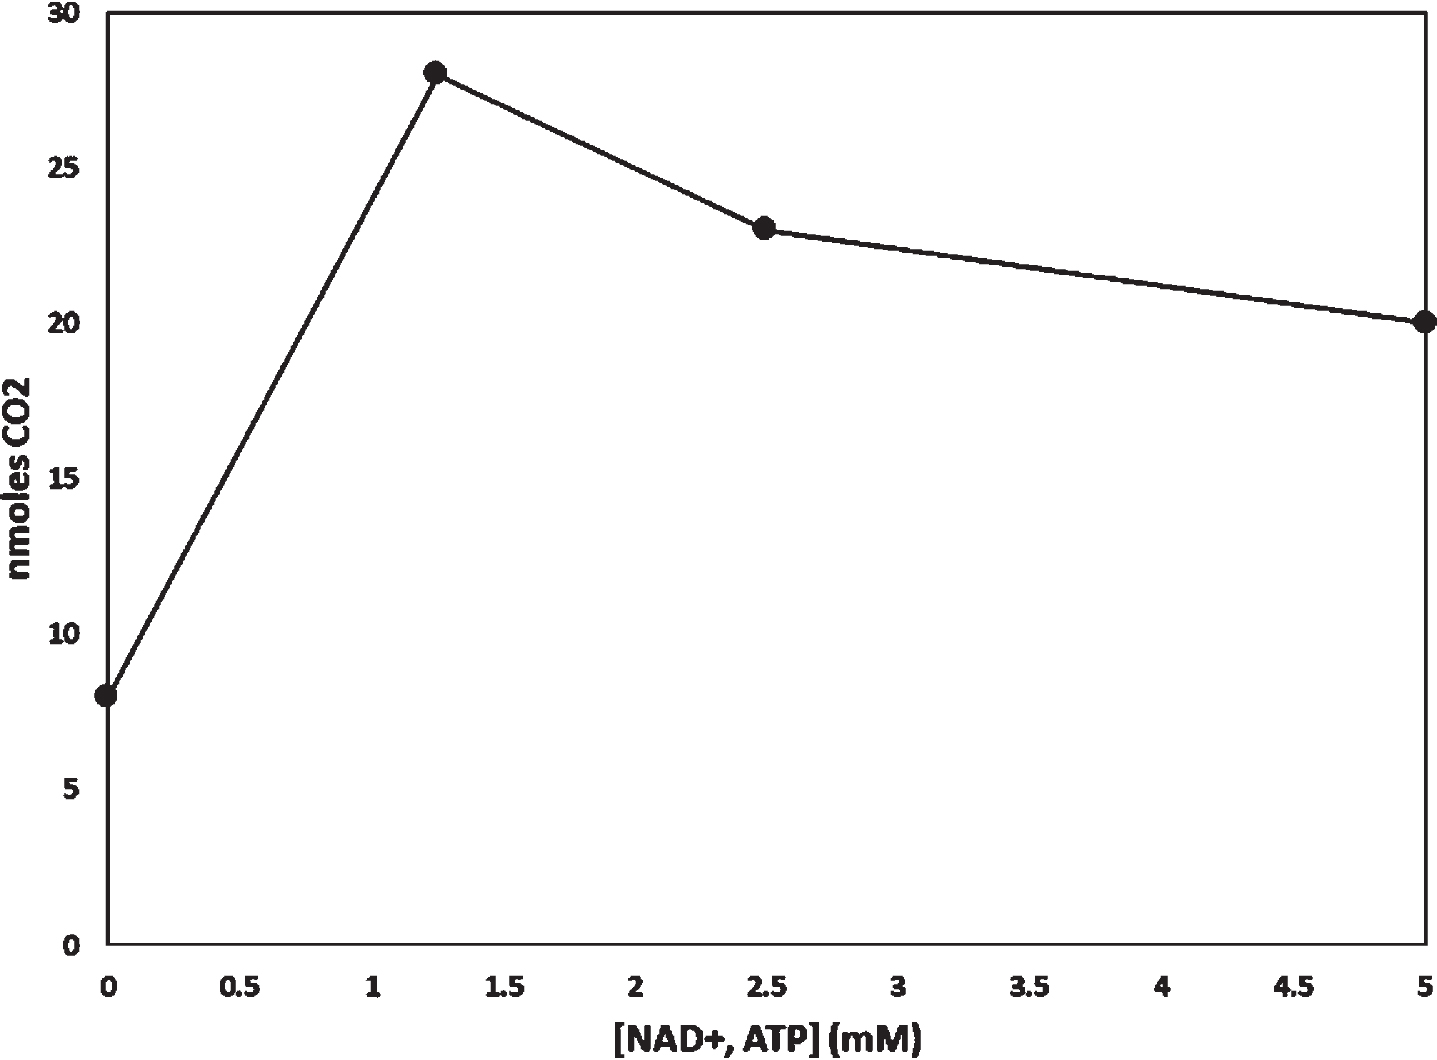 Effect of adding NAD + and ATP to a homogenate. Equal concentrations of NAD + and ATP were added to flasks containing homogenate from a common homogenate preparation. 14CO2 derived from radiolabeled BHB. The incubation period was 60 min.